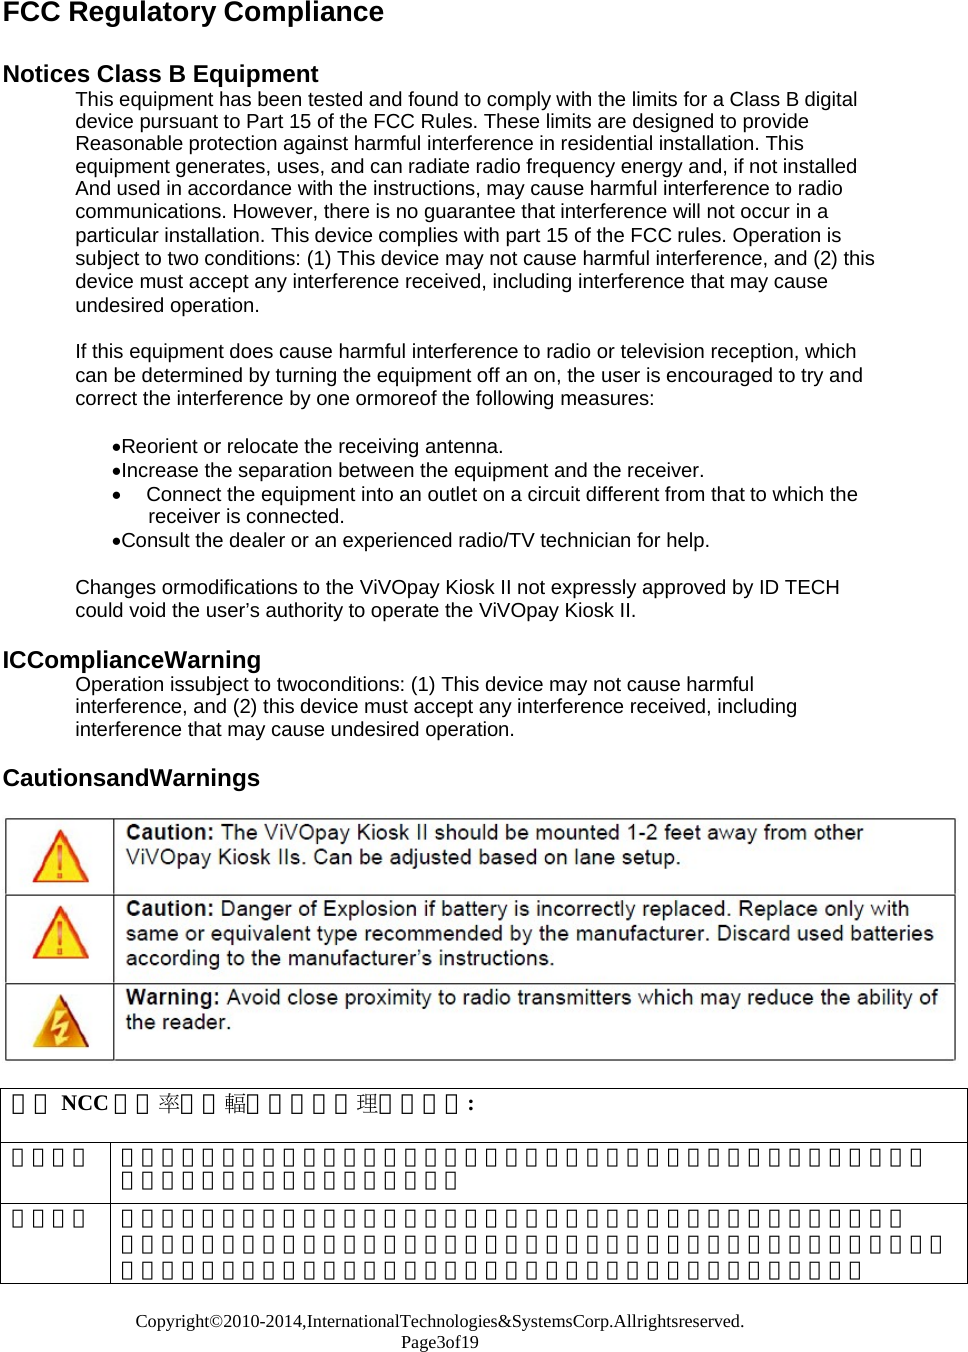 Copyright©2010-2014,InternationalTechnologies&amp;SystemsCorp.Allrightsreserved. Page3of19  FCC Regulatory Compliance   Notices Class B Equipment This equipment has been tested and found to comply with the limits for a Class B digital device pursuant to Part 15 of the FCC Rules. These limits are designed to provide Reasonable protection against harmful interference in residential installation. This equipment generates, uses, and can radiate radio frequency energy and, if not installed And used in accordance with the instructions, may cause harmful interference to radio communications. However, there is no guarantee that interference will not occur in a particular installation. This device complies with part 15 of the FCC rules. Operation is subject to two conditions: (1) This device may not cause harmful interference, and (2) this device must accept any interference received, including interference that may cause undesired operation.  If this equipment does cause harmful interference to radio or television reception, which can be determined by turning the equipment off an on, the user is encouraged to try and correct the interference by one ormoreof the following measures:  Reorient or relocate the receiving antenna. Increase the separation between the equipment and the receiver.  Connect the equipment into an outlet on a circuit different from that to which the receiver is connected. Consult the dealer or an experienced radio/TV technician for help.  Changes ormodifications to the ViVOpay Kiosk II not expressly approved by ID TECH could void the user’s authority to operate the ViVOpay Kiosk II.  ICComplianceWarning Operation issubject to twoconditions: (1) This device may not cause harmful interference, and (2) this device must accept any interference received, including interference that may cause undesired operation.  CautionsandWarnings    根據NCC低功率電波輻射性電機管理辦法規定: 第十二條 經型式認證合格之低功率射頻電機，非經許可，公司、商號或使用者均不得擅自變更頻率、 加大功率或變更原設計之特性及功能。 第十四條 低功率射頻電機之使用不得影響飛航安全及干擾合法通信；經發現有干擾現象時，應立即 停用，並改善至無干擾時方得繼續使用。前項合法通信，指依電信法規定作業之無線電通信。 低功率射頻電機須忍受合法通信或工業、科學及醫療用電波輻射性電機設備之干擾。 